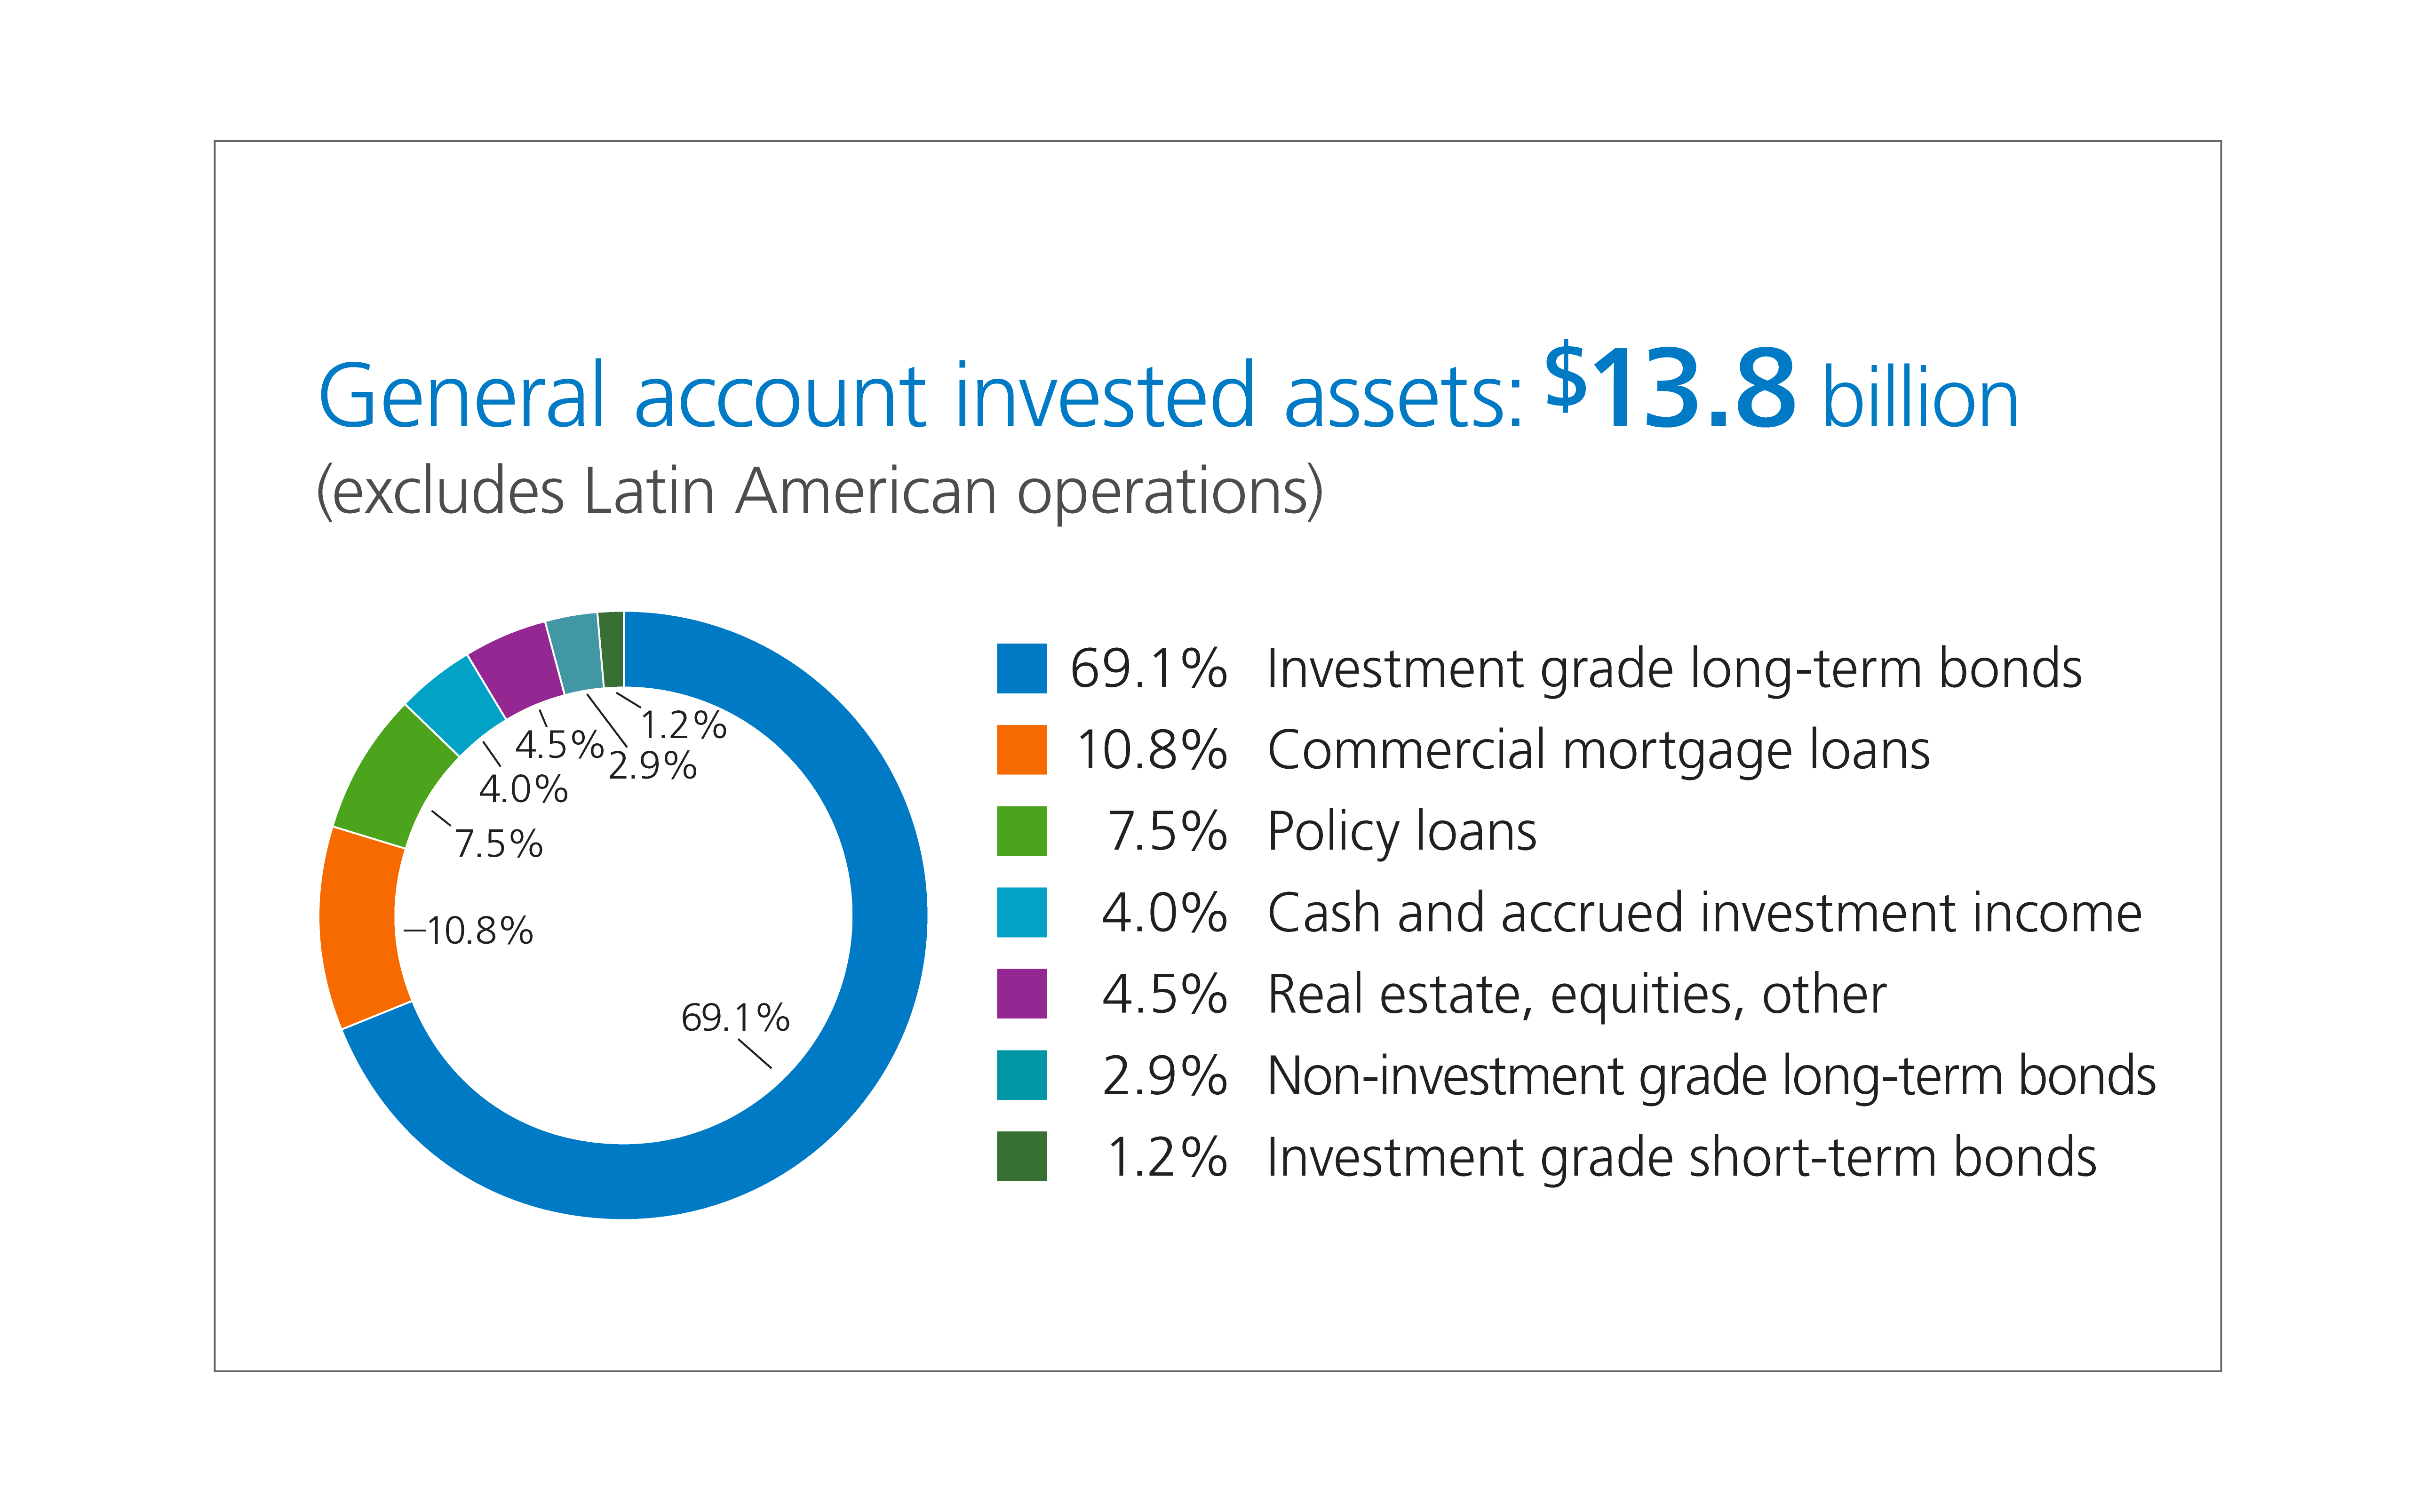 Circle chart showing General Account Assets invested is 13.8 billion.